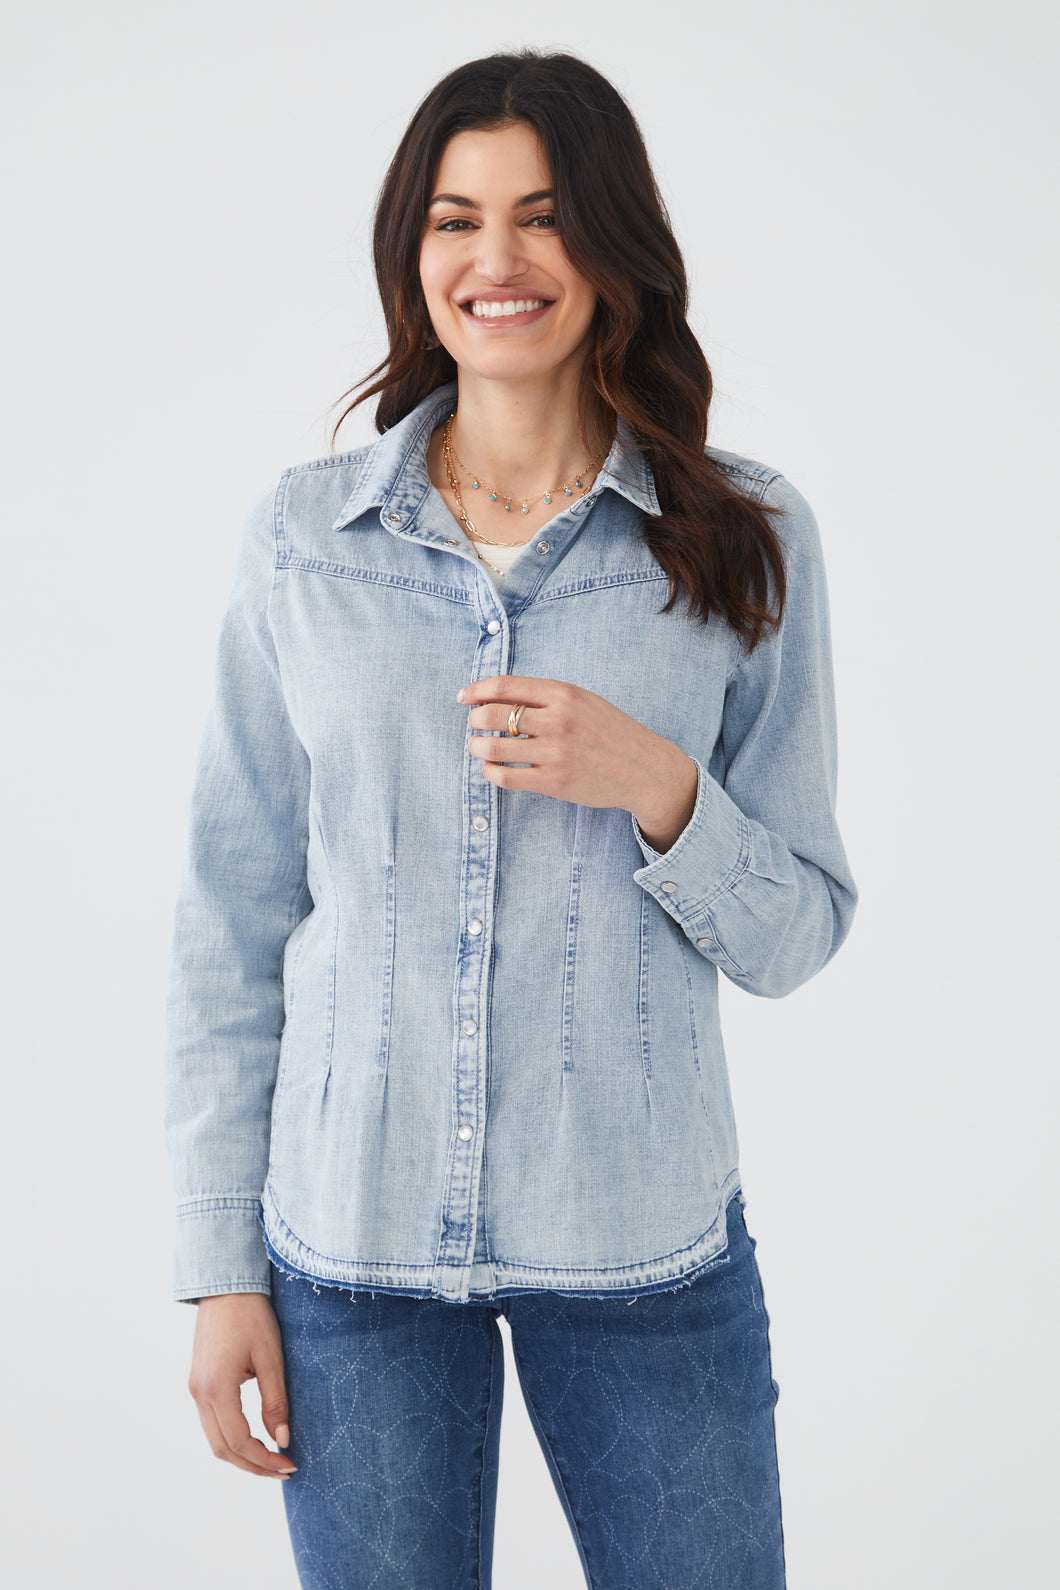 The pleating on this light blue wash top gives our Wen a classic feminine touch, while the pearlized buttons add an extra touch. Slight fray on the bottom hem adds a bit of edge to this fabulous top. This is a style you want to add to your closet as it can be worn alone or layered over your favorite top.  Color- Light blue wash. Pearlized buttons.  Button down. Button cuff. Waist pleating.